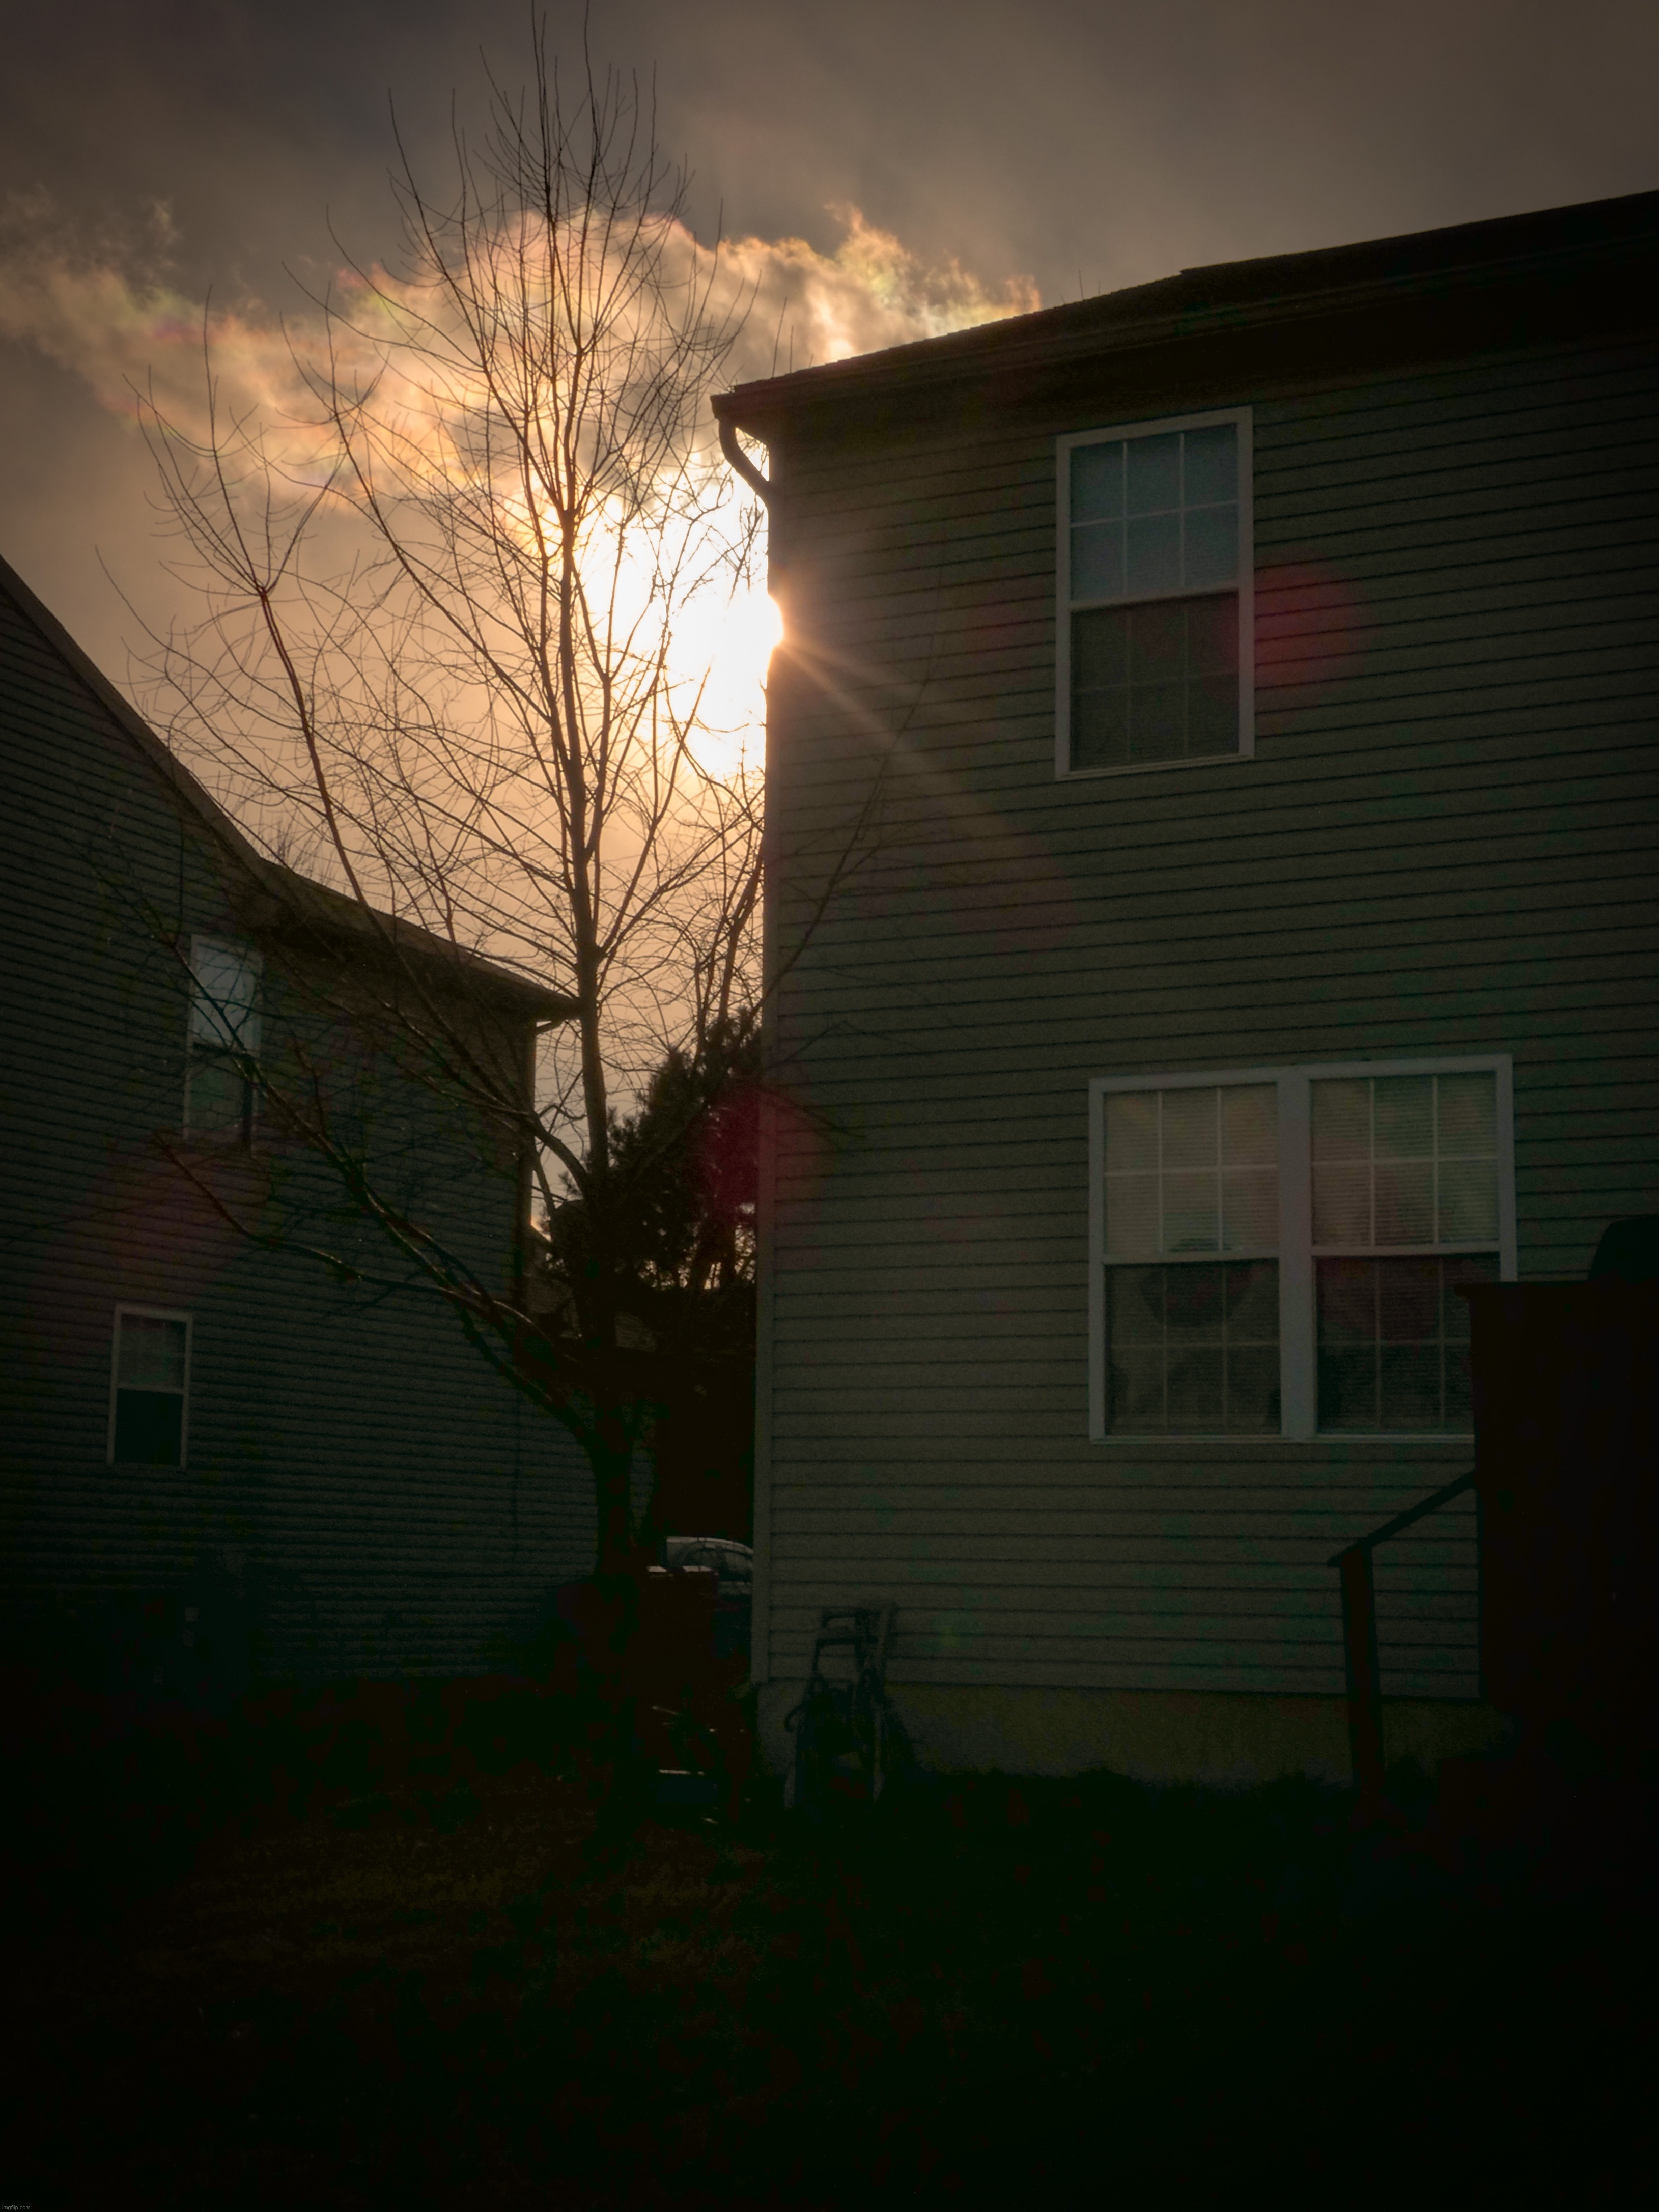 The sun between a house today, also, I was thinking of getting up really early tomorrow and trying to get some nice sunrise pics | image tagged in share your own photos | made w/ Imgflip meme maker